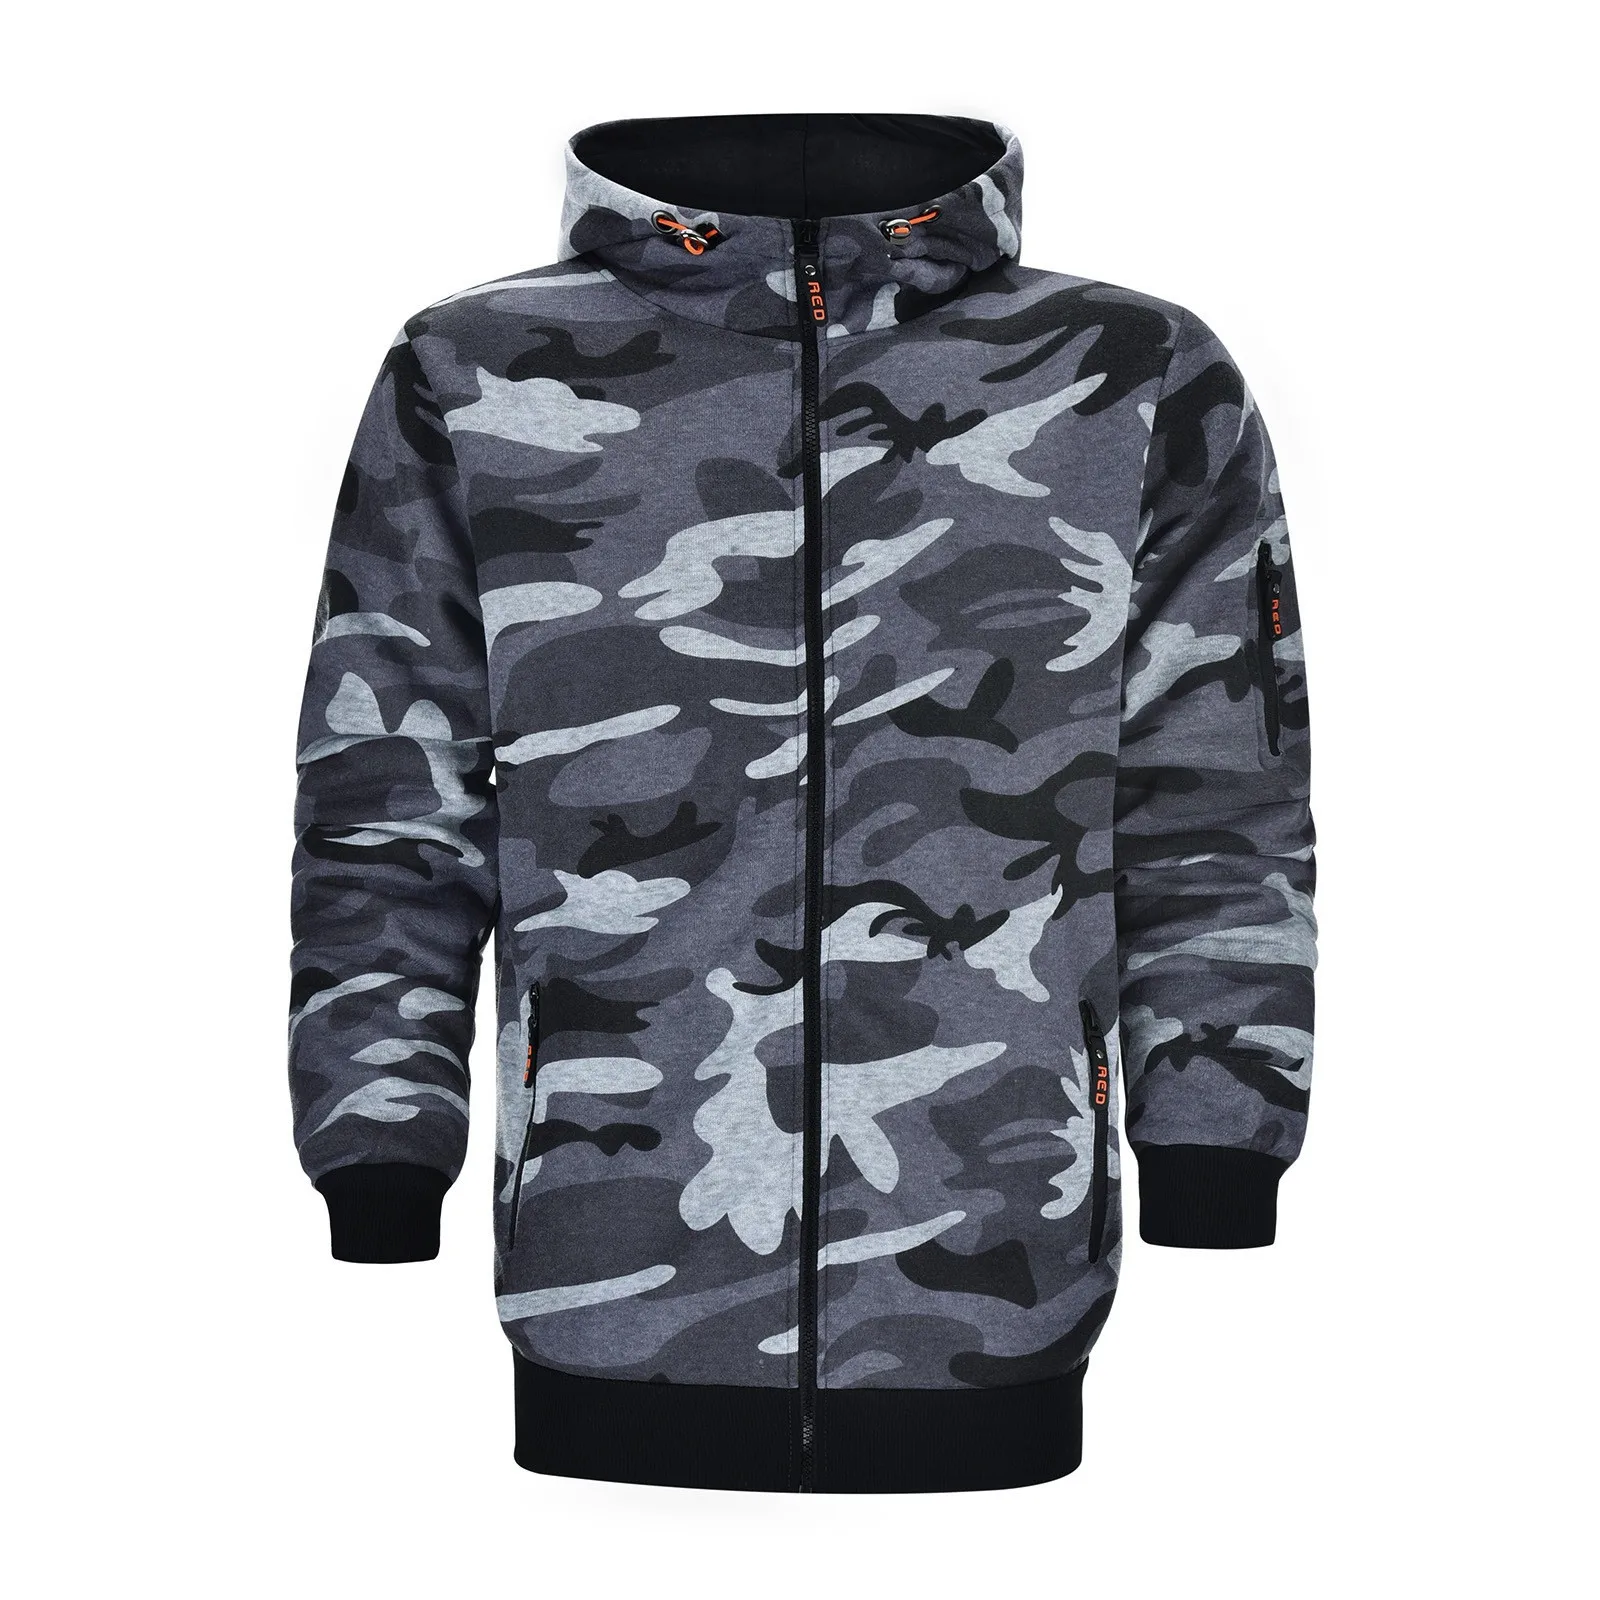 

Men's Casual Fashion Sweater Autumn and Winter Camouflage Hoodie Outerwear Cardigan Zipper Lightweight Hooded Jacket 2024